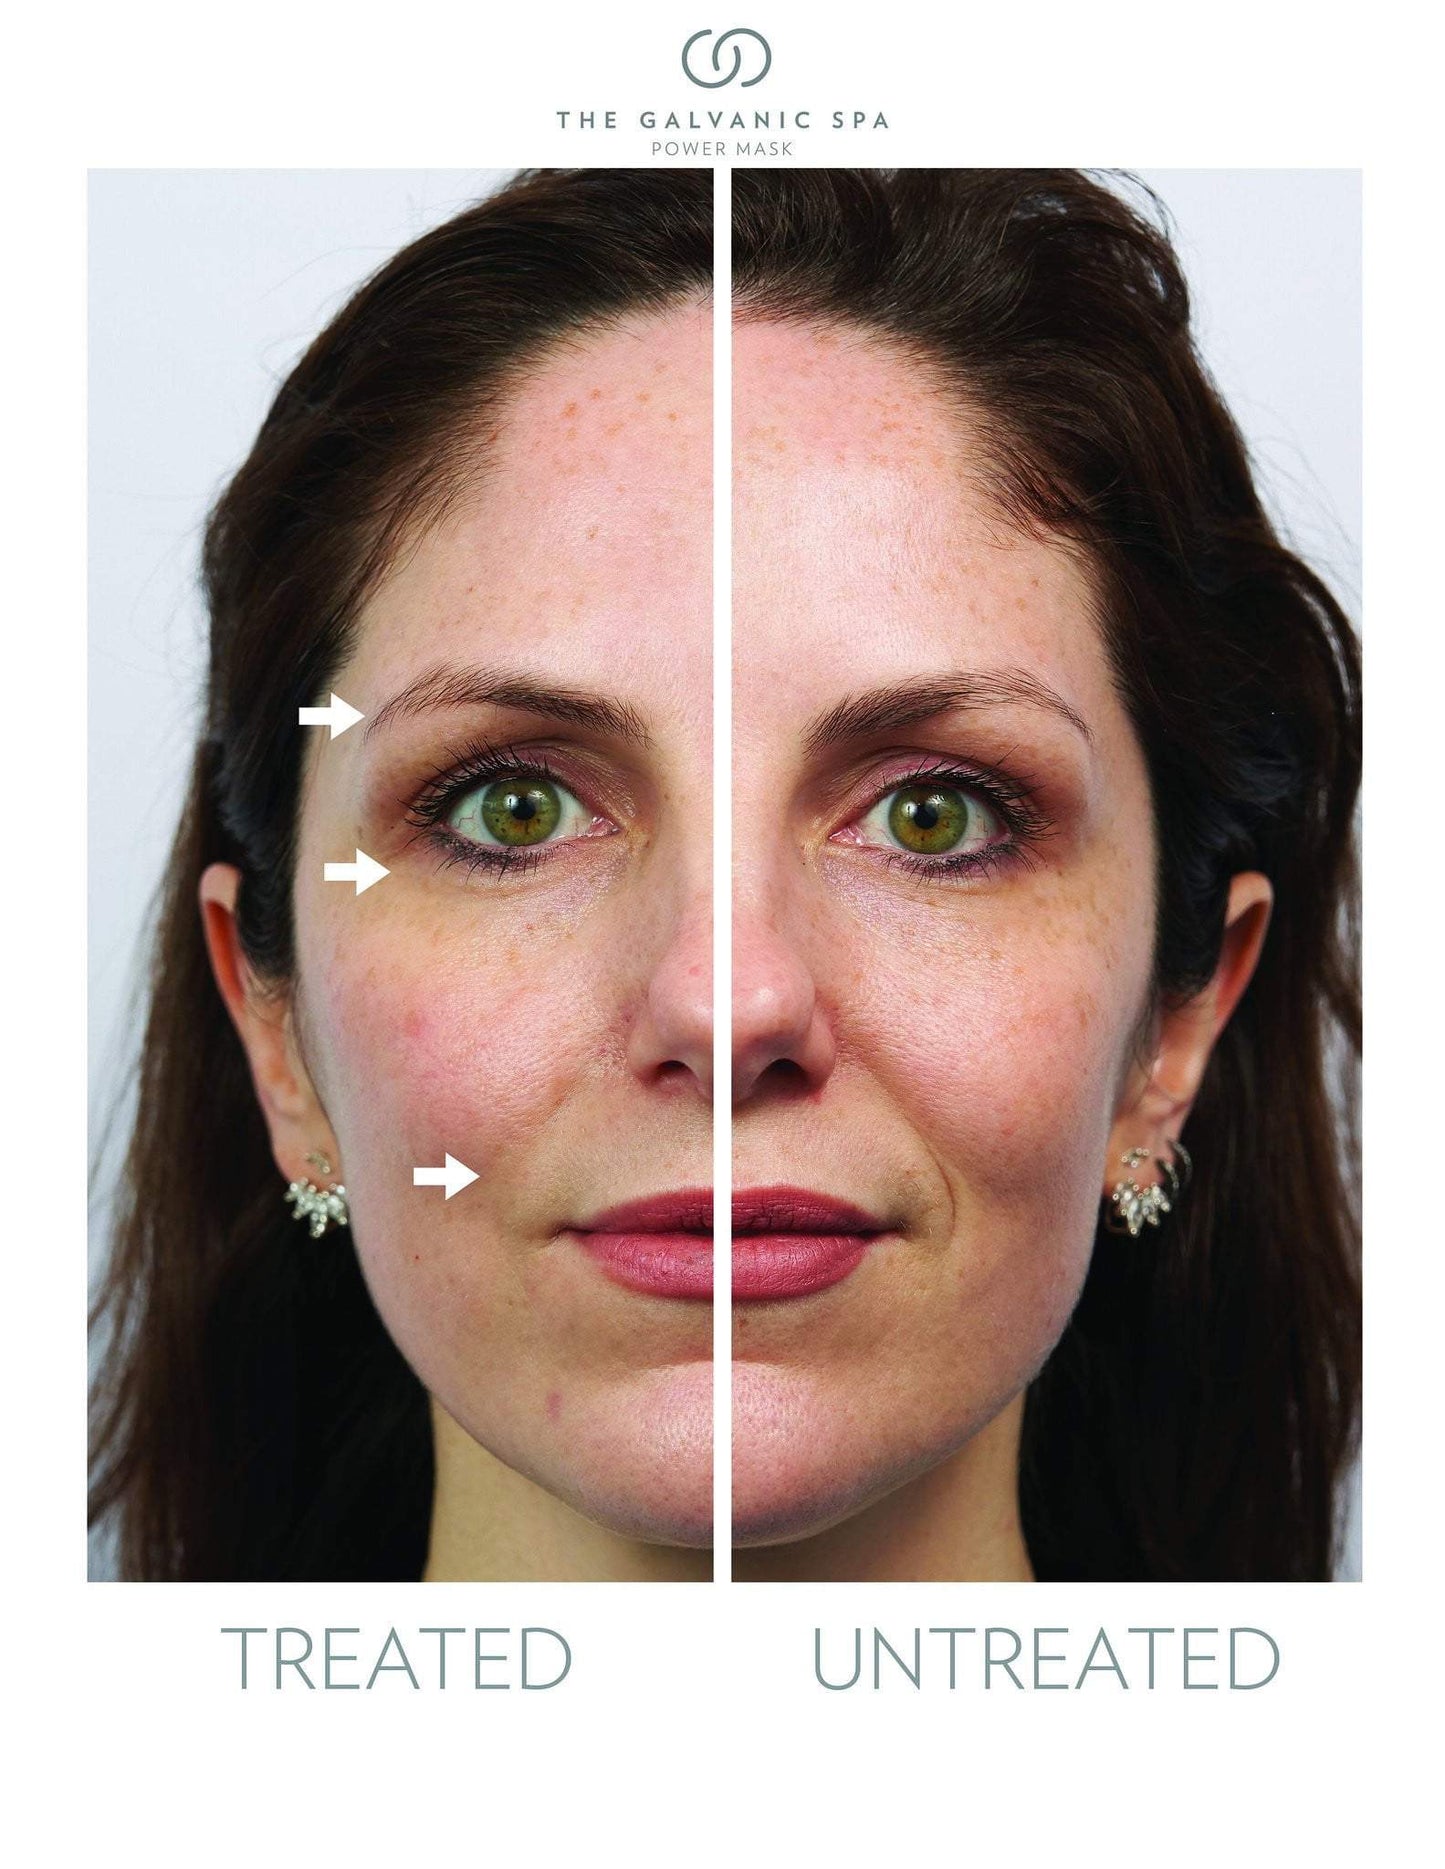 Two halves of a woman's face treated and untreated with Galvanic Spa